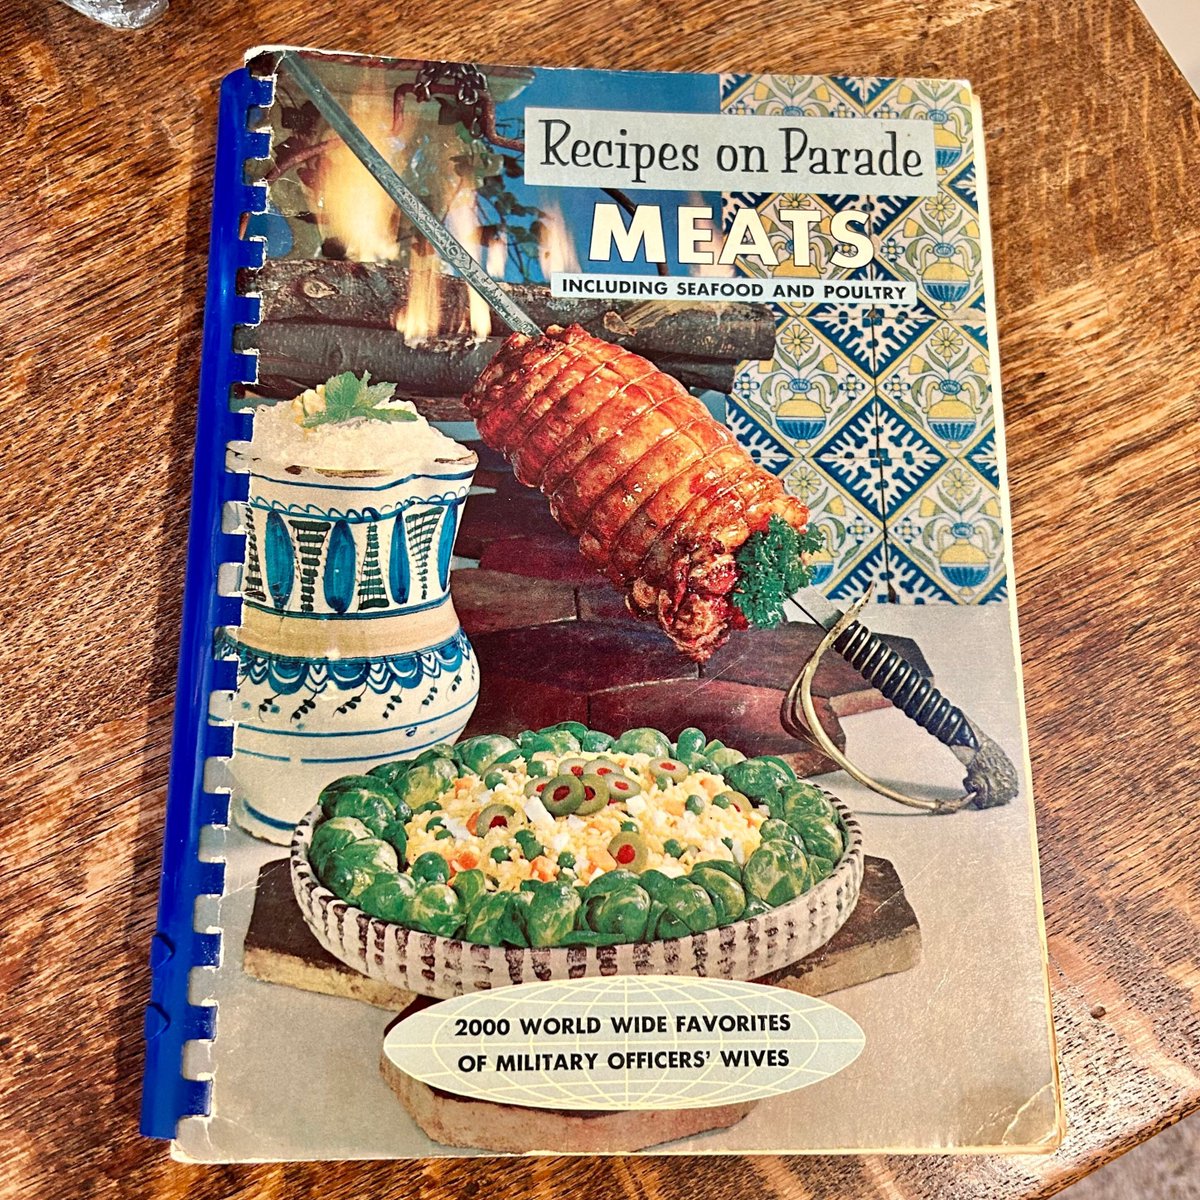 Excited to share the latest addition to my #etsy shop: Vintage Cookbook Recipes on Parade Meats including Seafood and Poultry Military Officers' Wives 1964 Kitchen Cook Chef Recipe Book Gift etsy.me/40eFXkx #cookbook #recipeskitchen #chefgift #midcentury